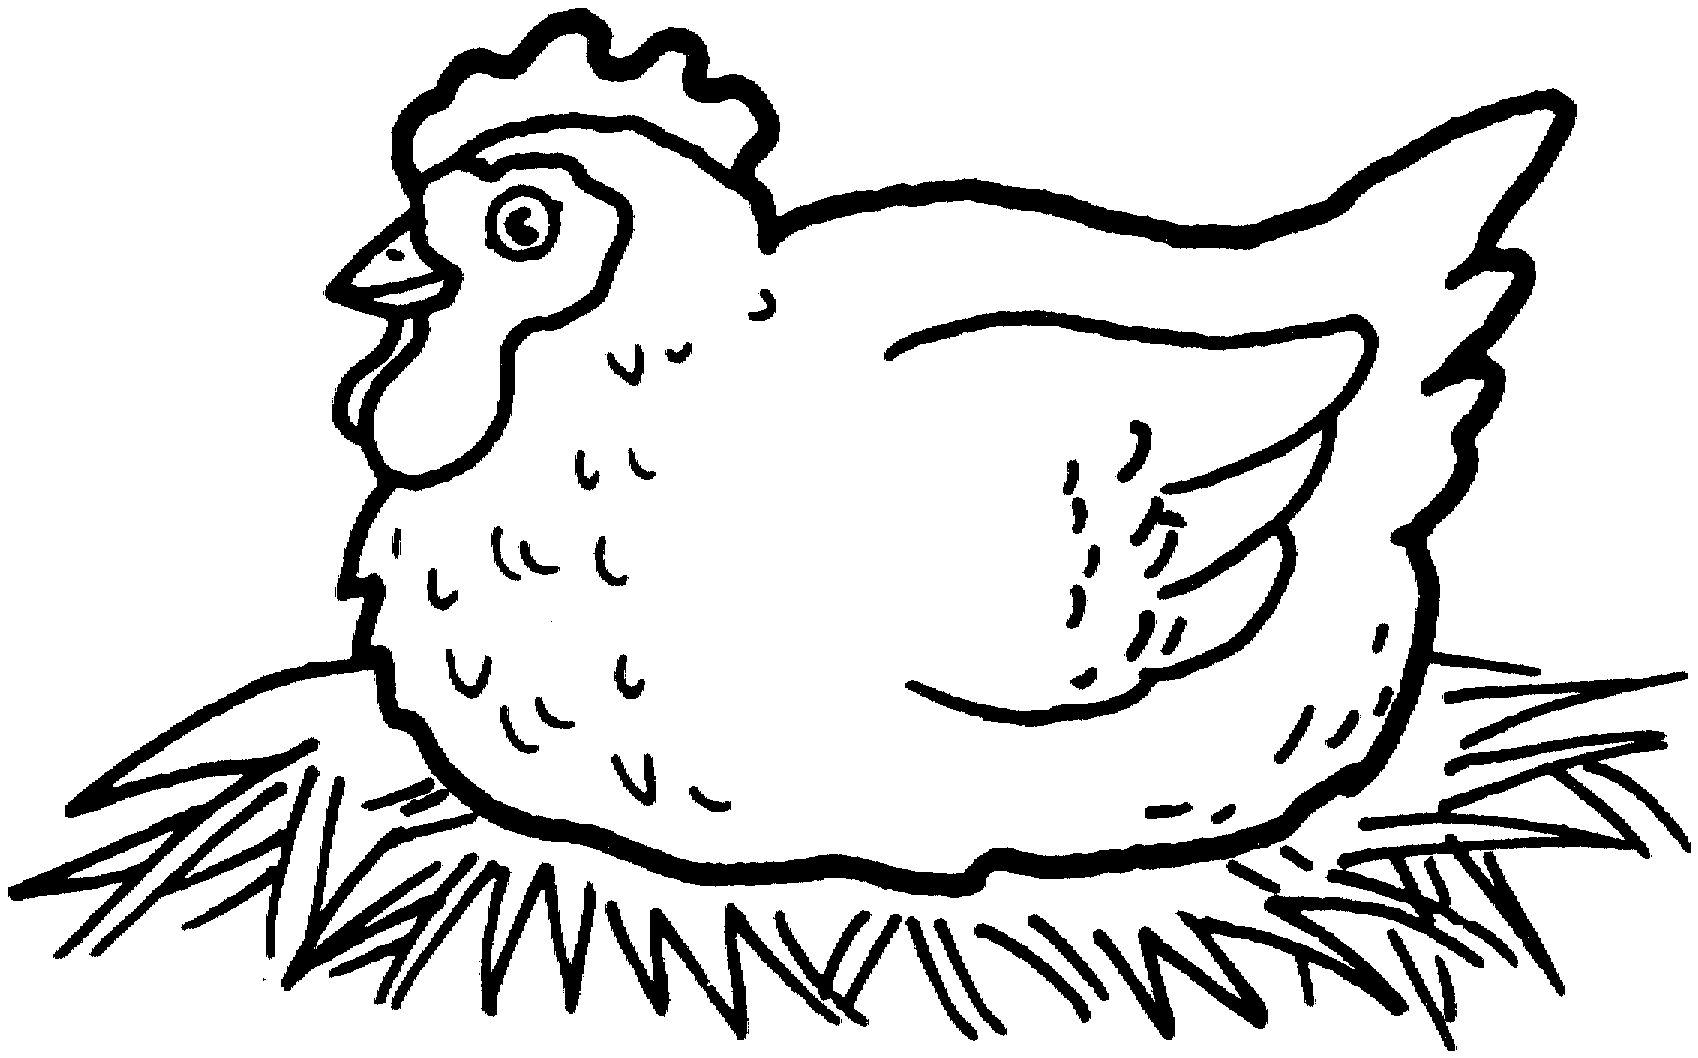 poultry coloring pages